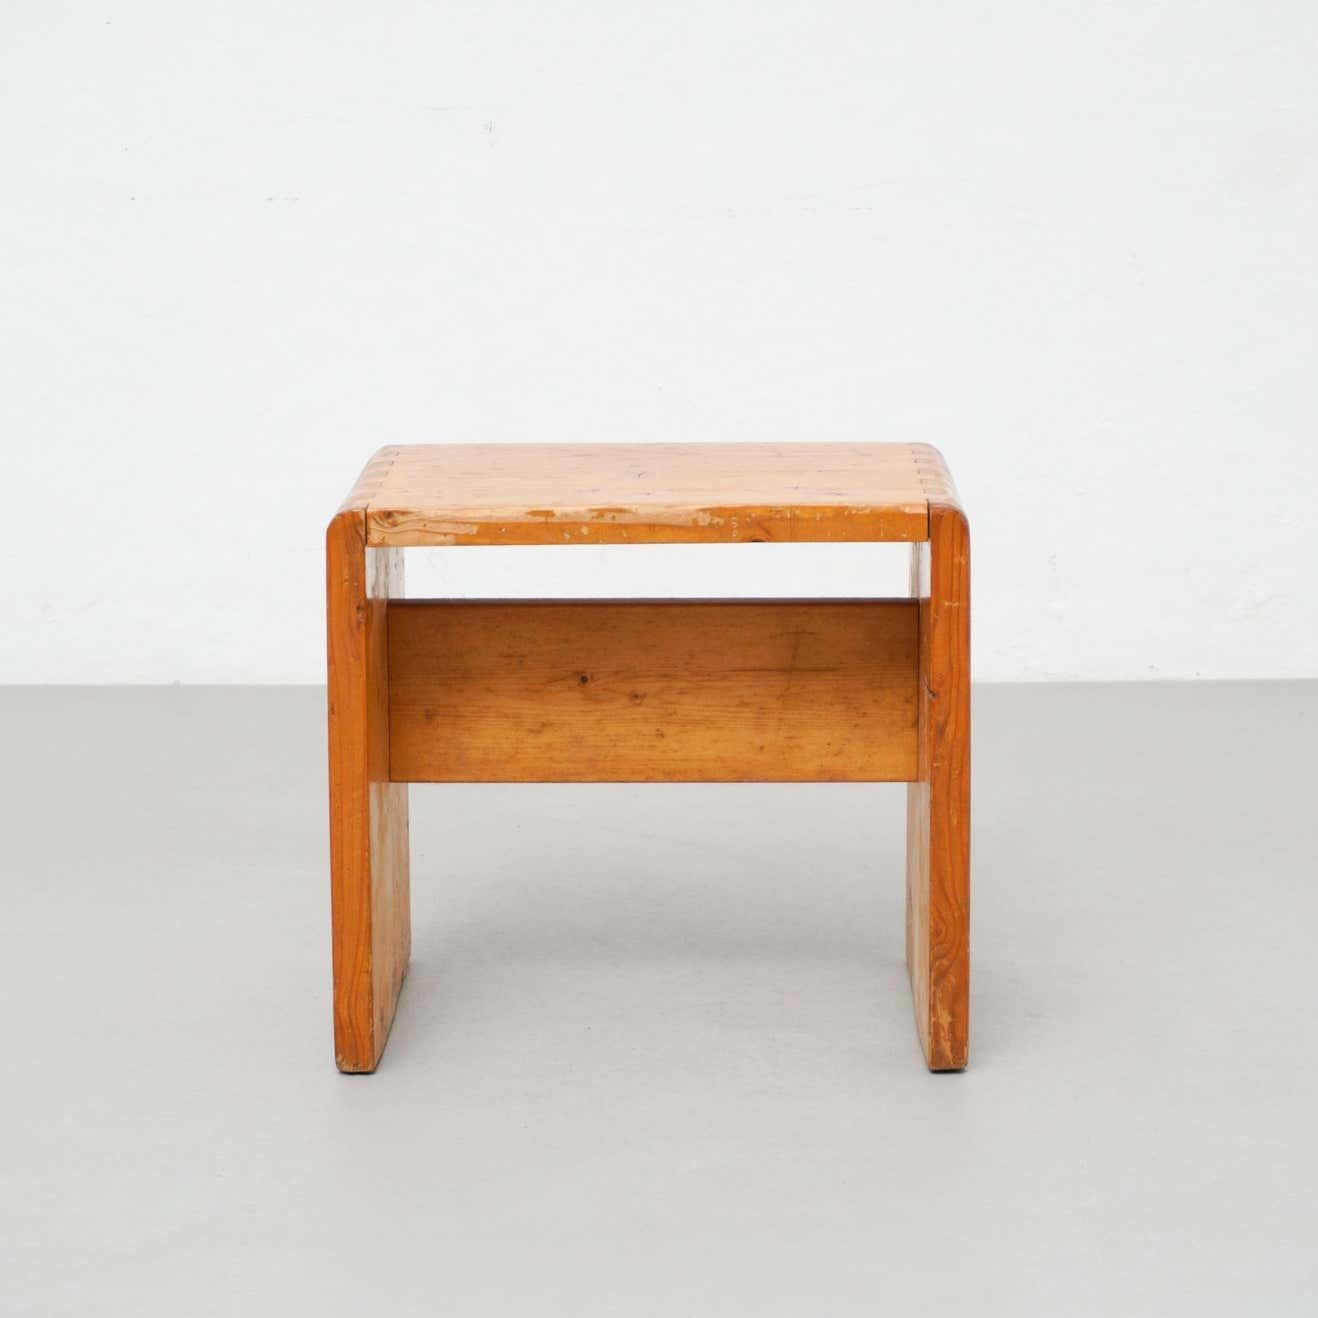 Stool designed by Charlotte Perriand for Les Arcs ski Resort, circa 1960, manufactured in France.
Pinewood.

In nice condition, with wear consistent with age and use, preserving a beautiful patina.

Charlotte Perriand (1903-1999). She was born